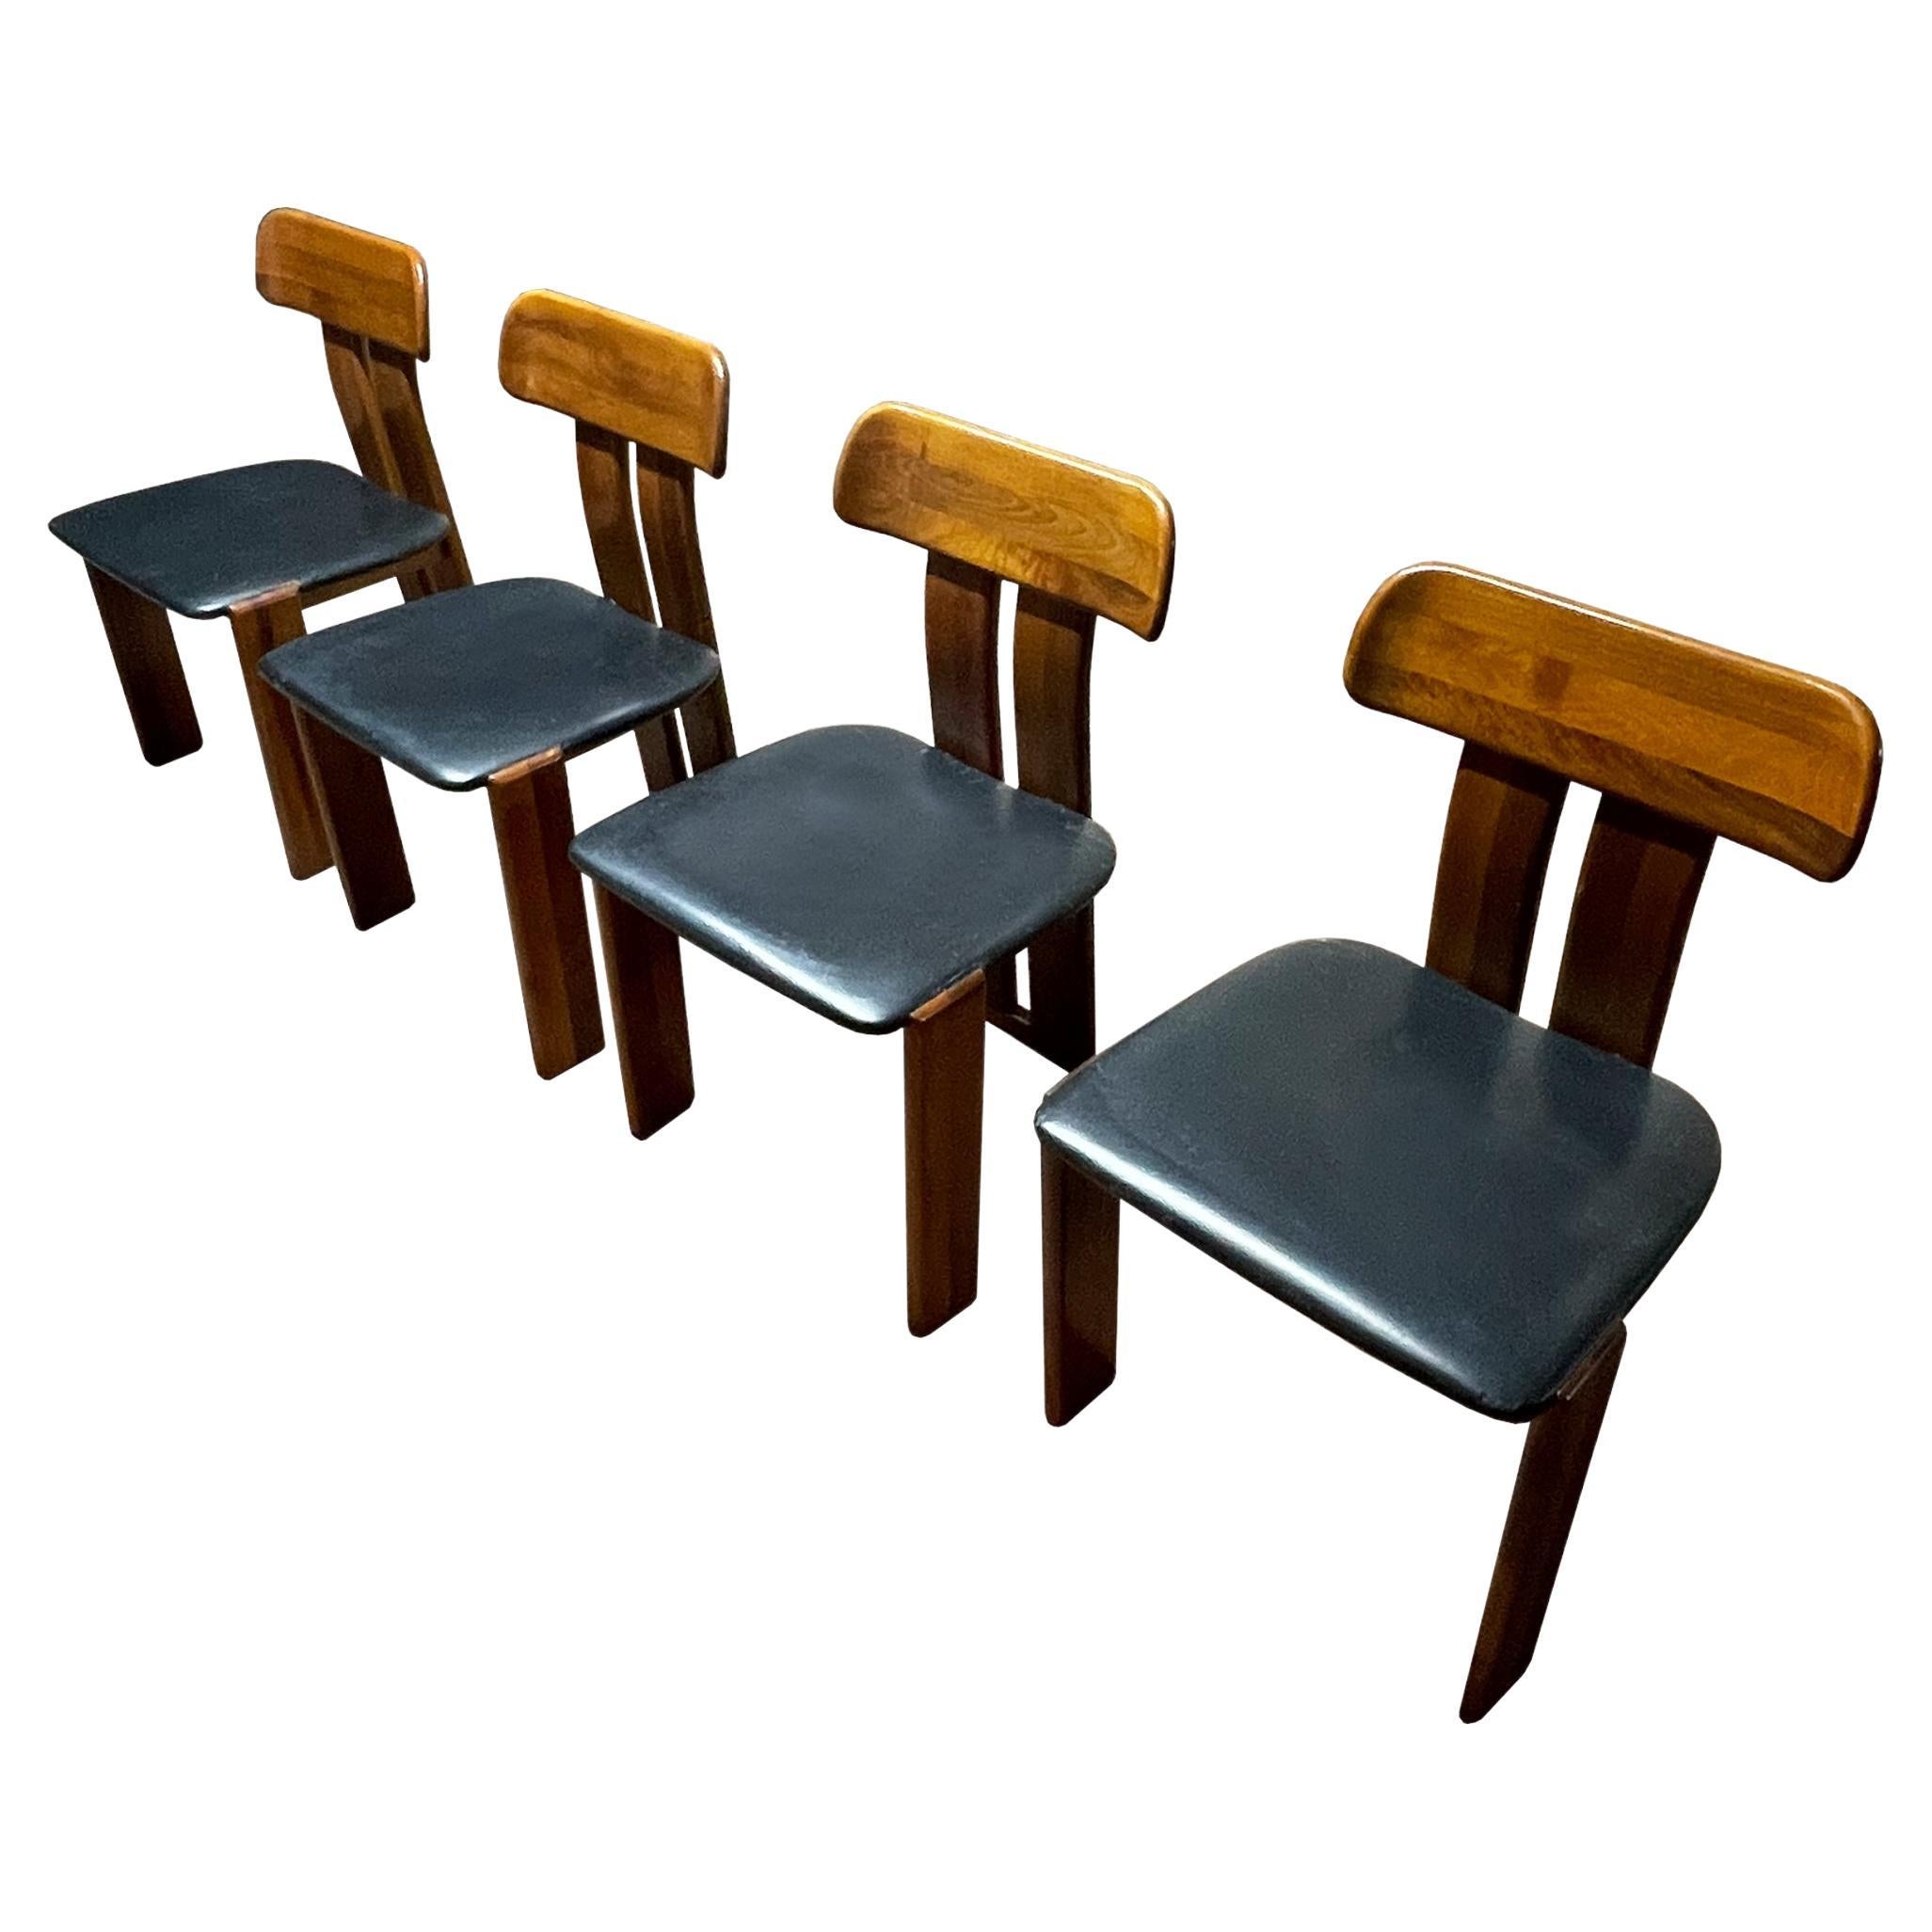 Mario Marenco Walnut Sapporo Dining Chairs for Mobilgirgi, 1970s, Set of 4 For Sale